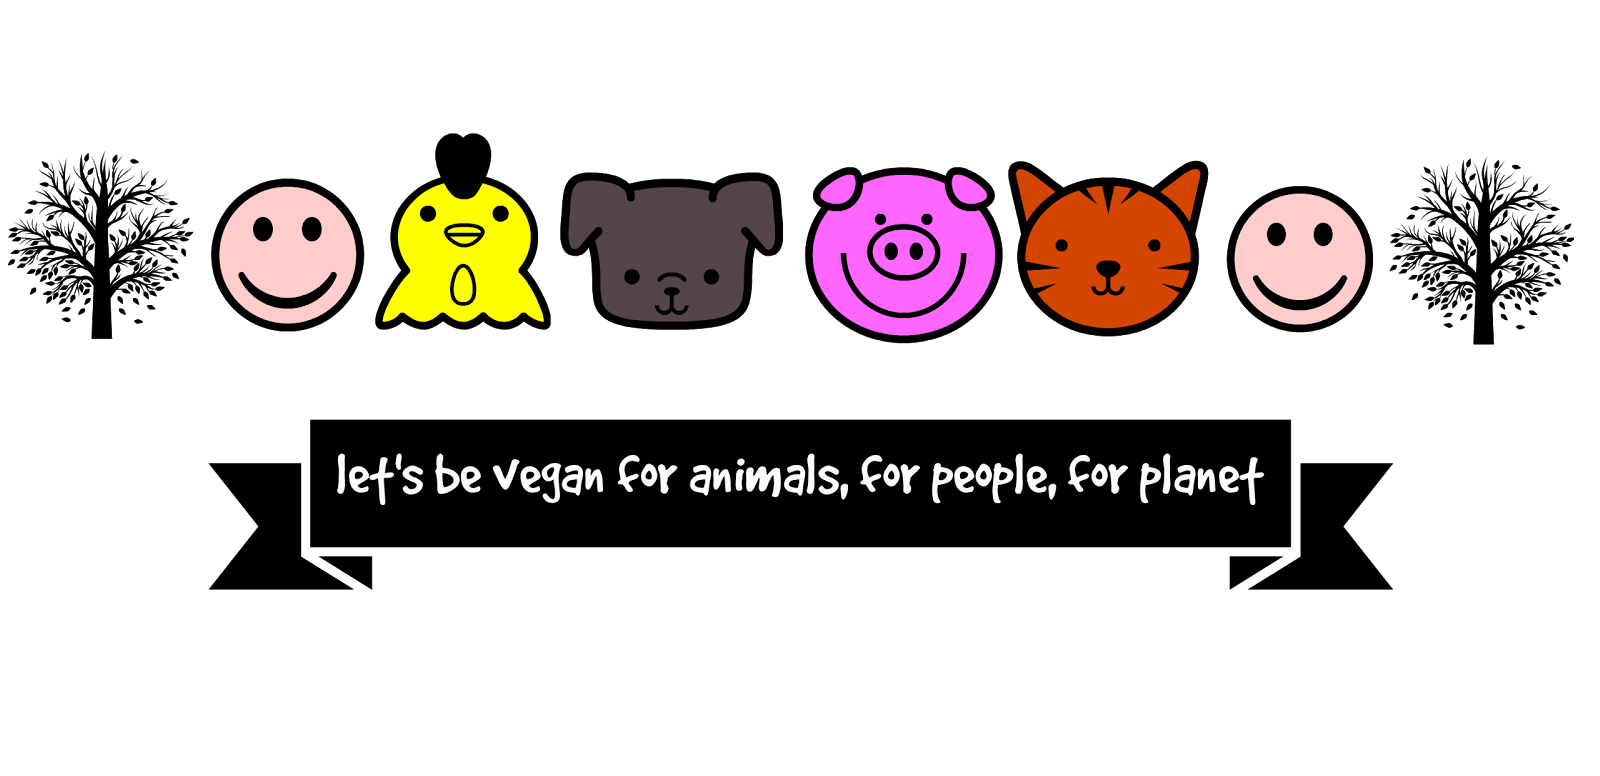 let's be vegan for animals, for people, for planet